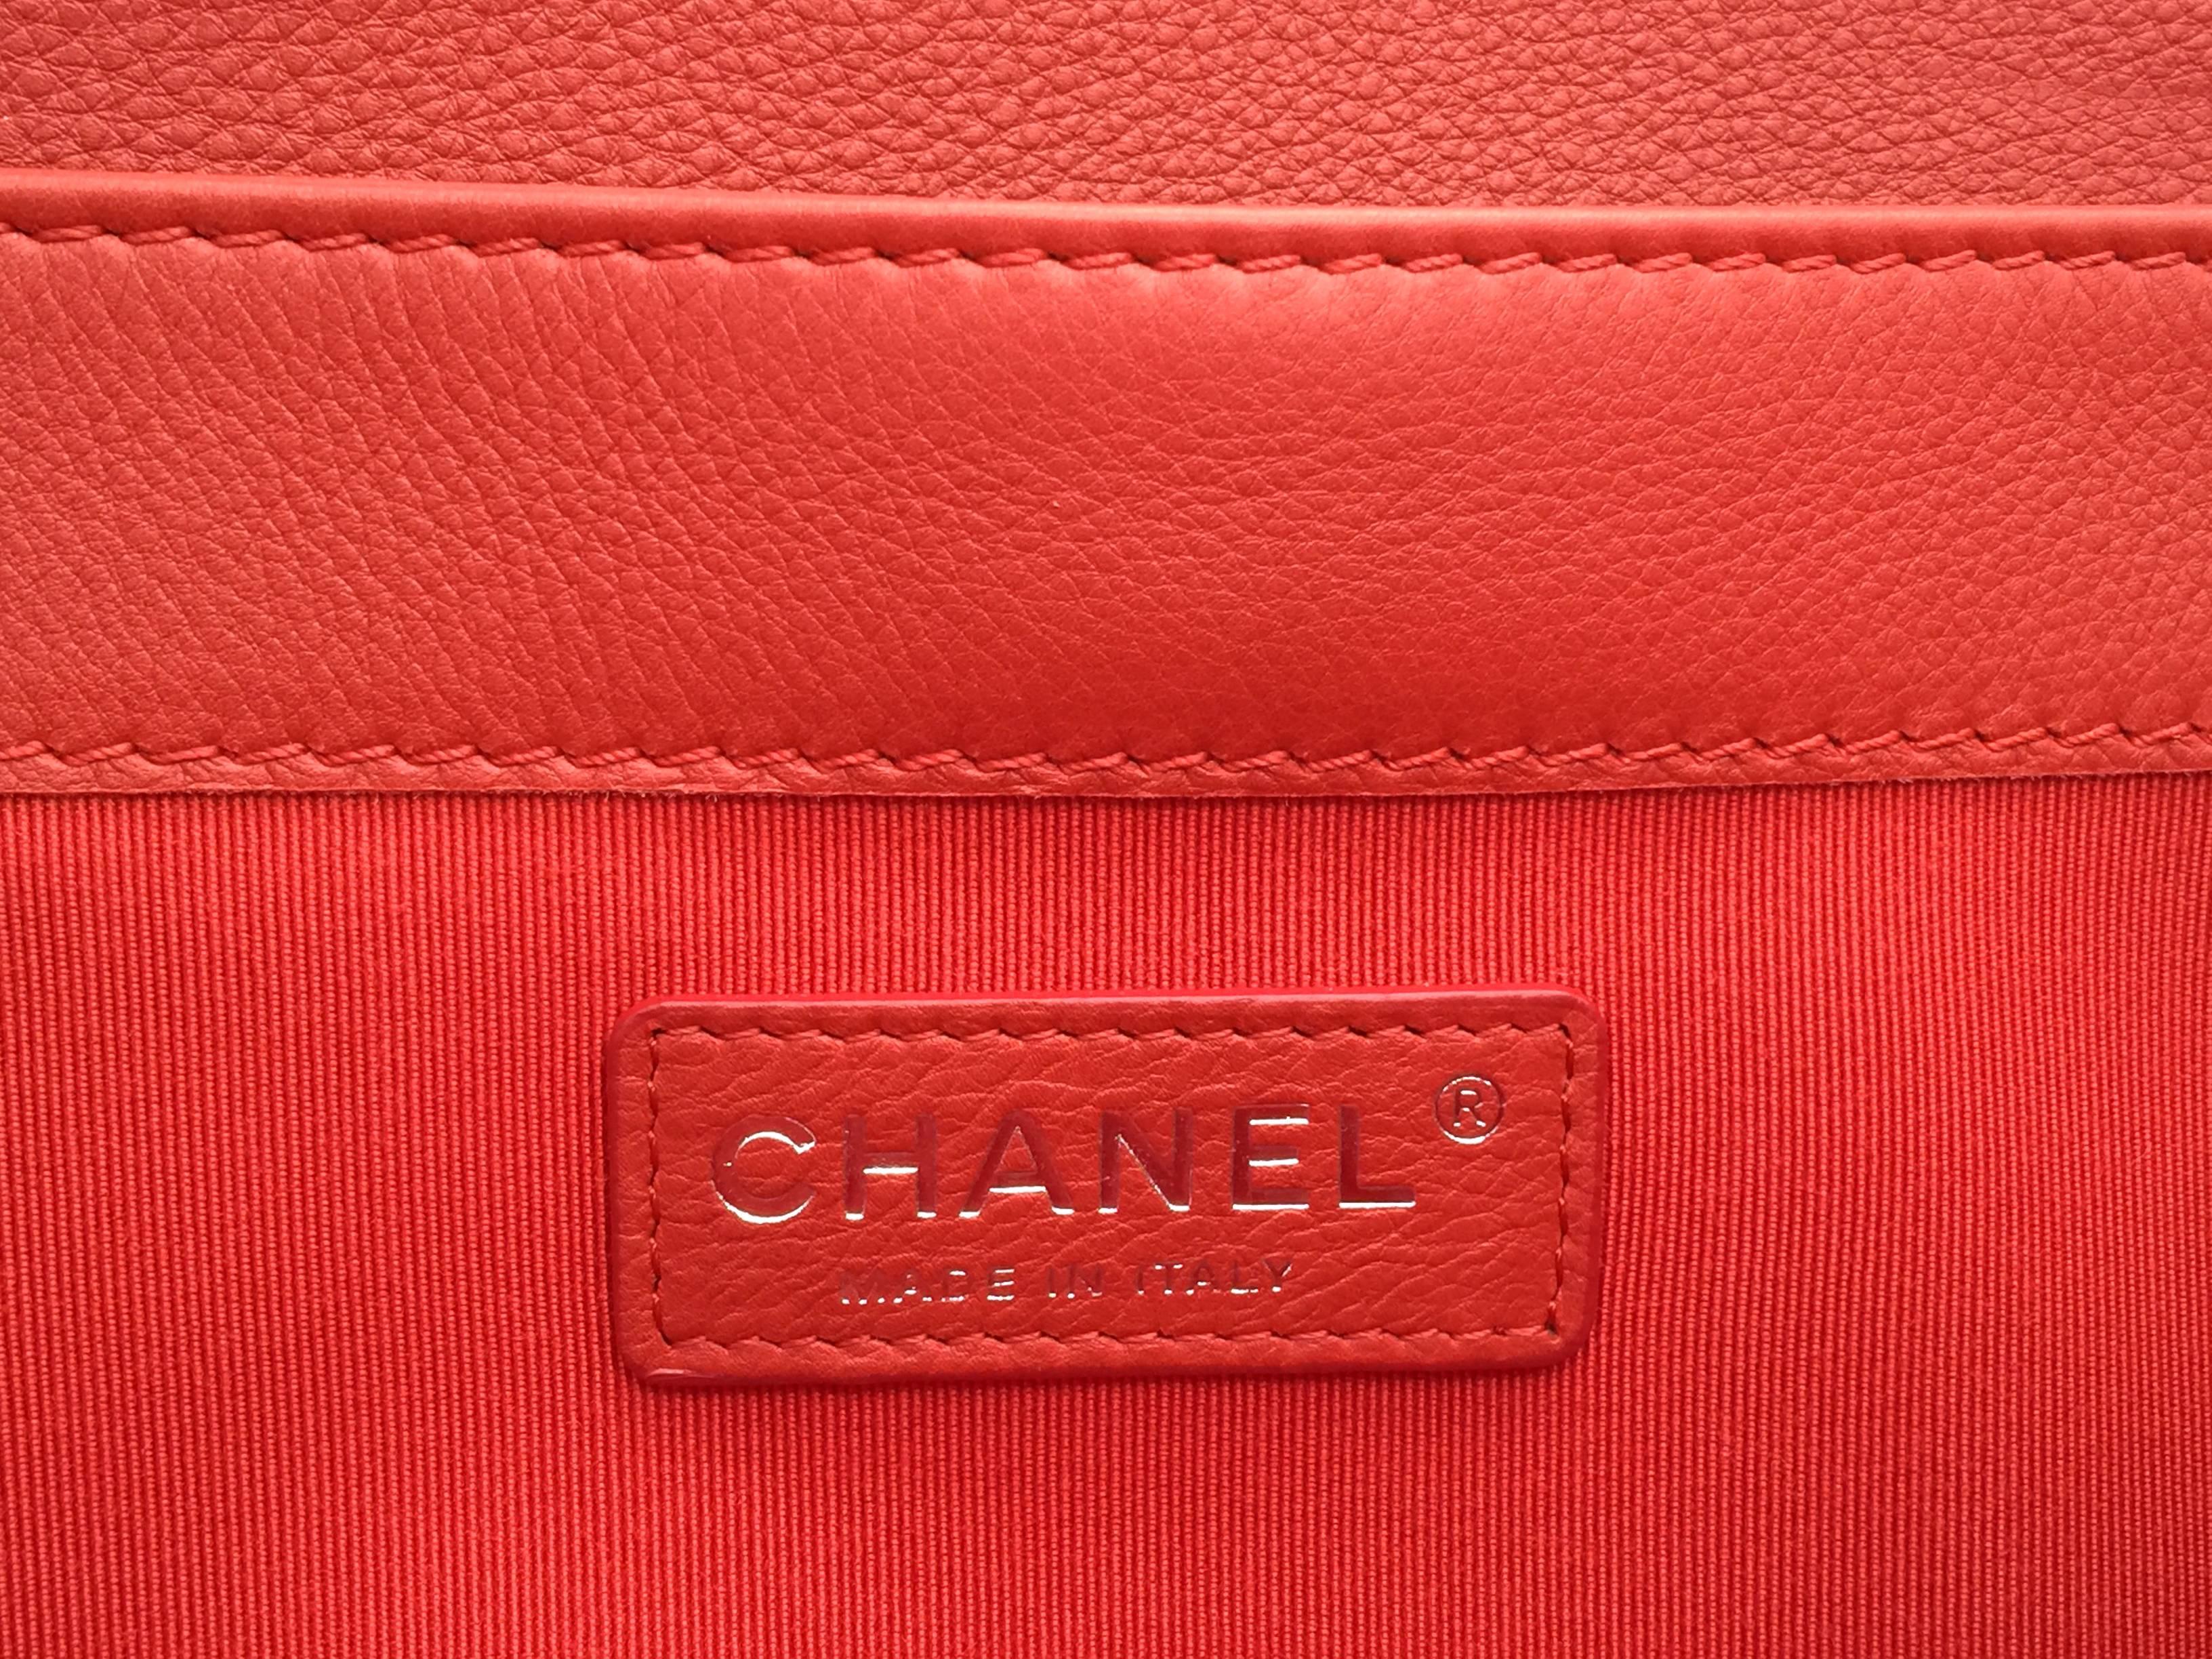 Chanel Boy Reverso Red Quilted Lambskin Leather SHW Chain Shoulder Bag 5